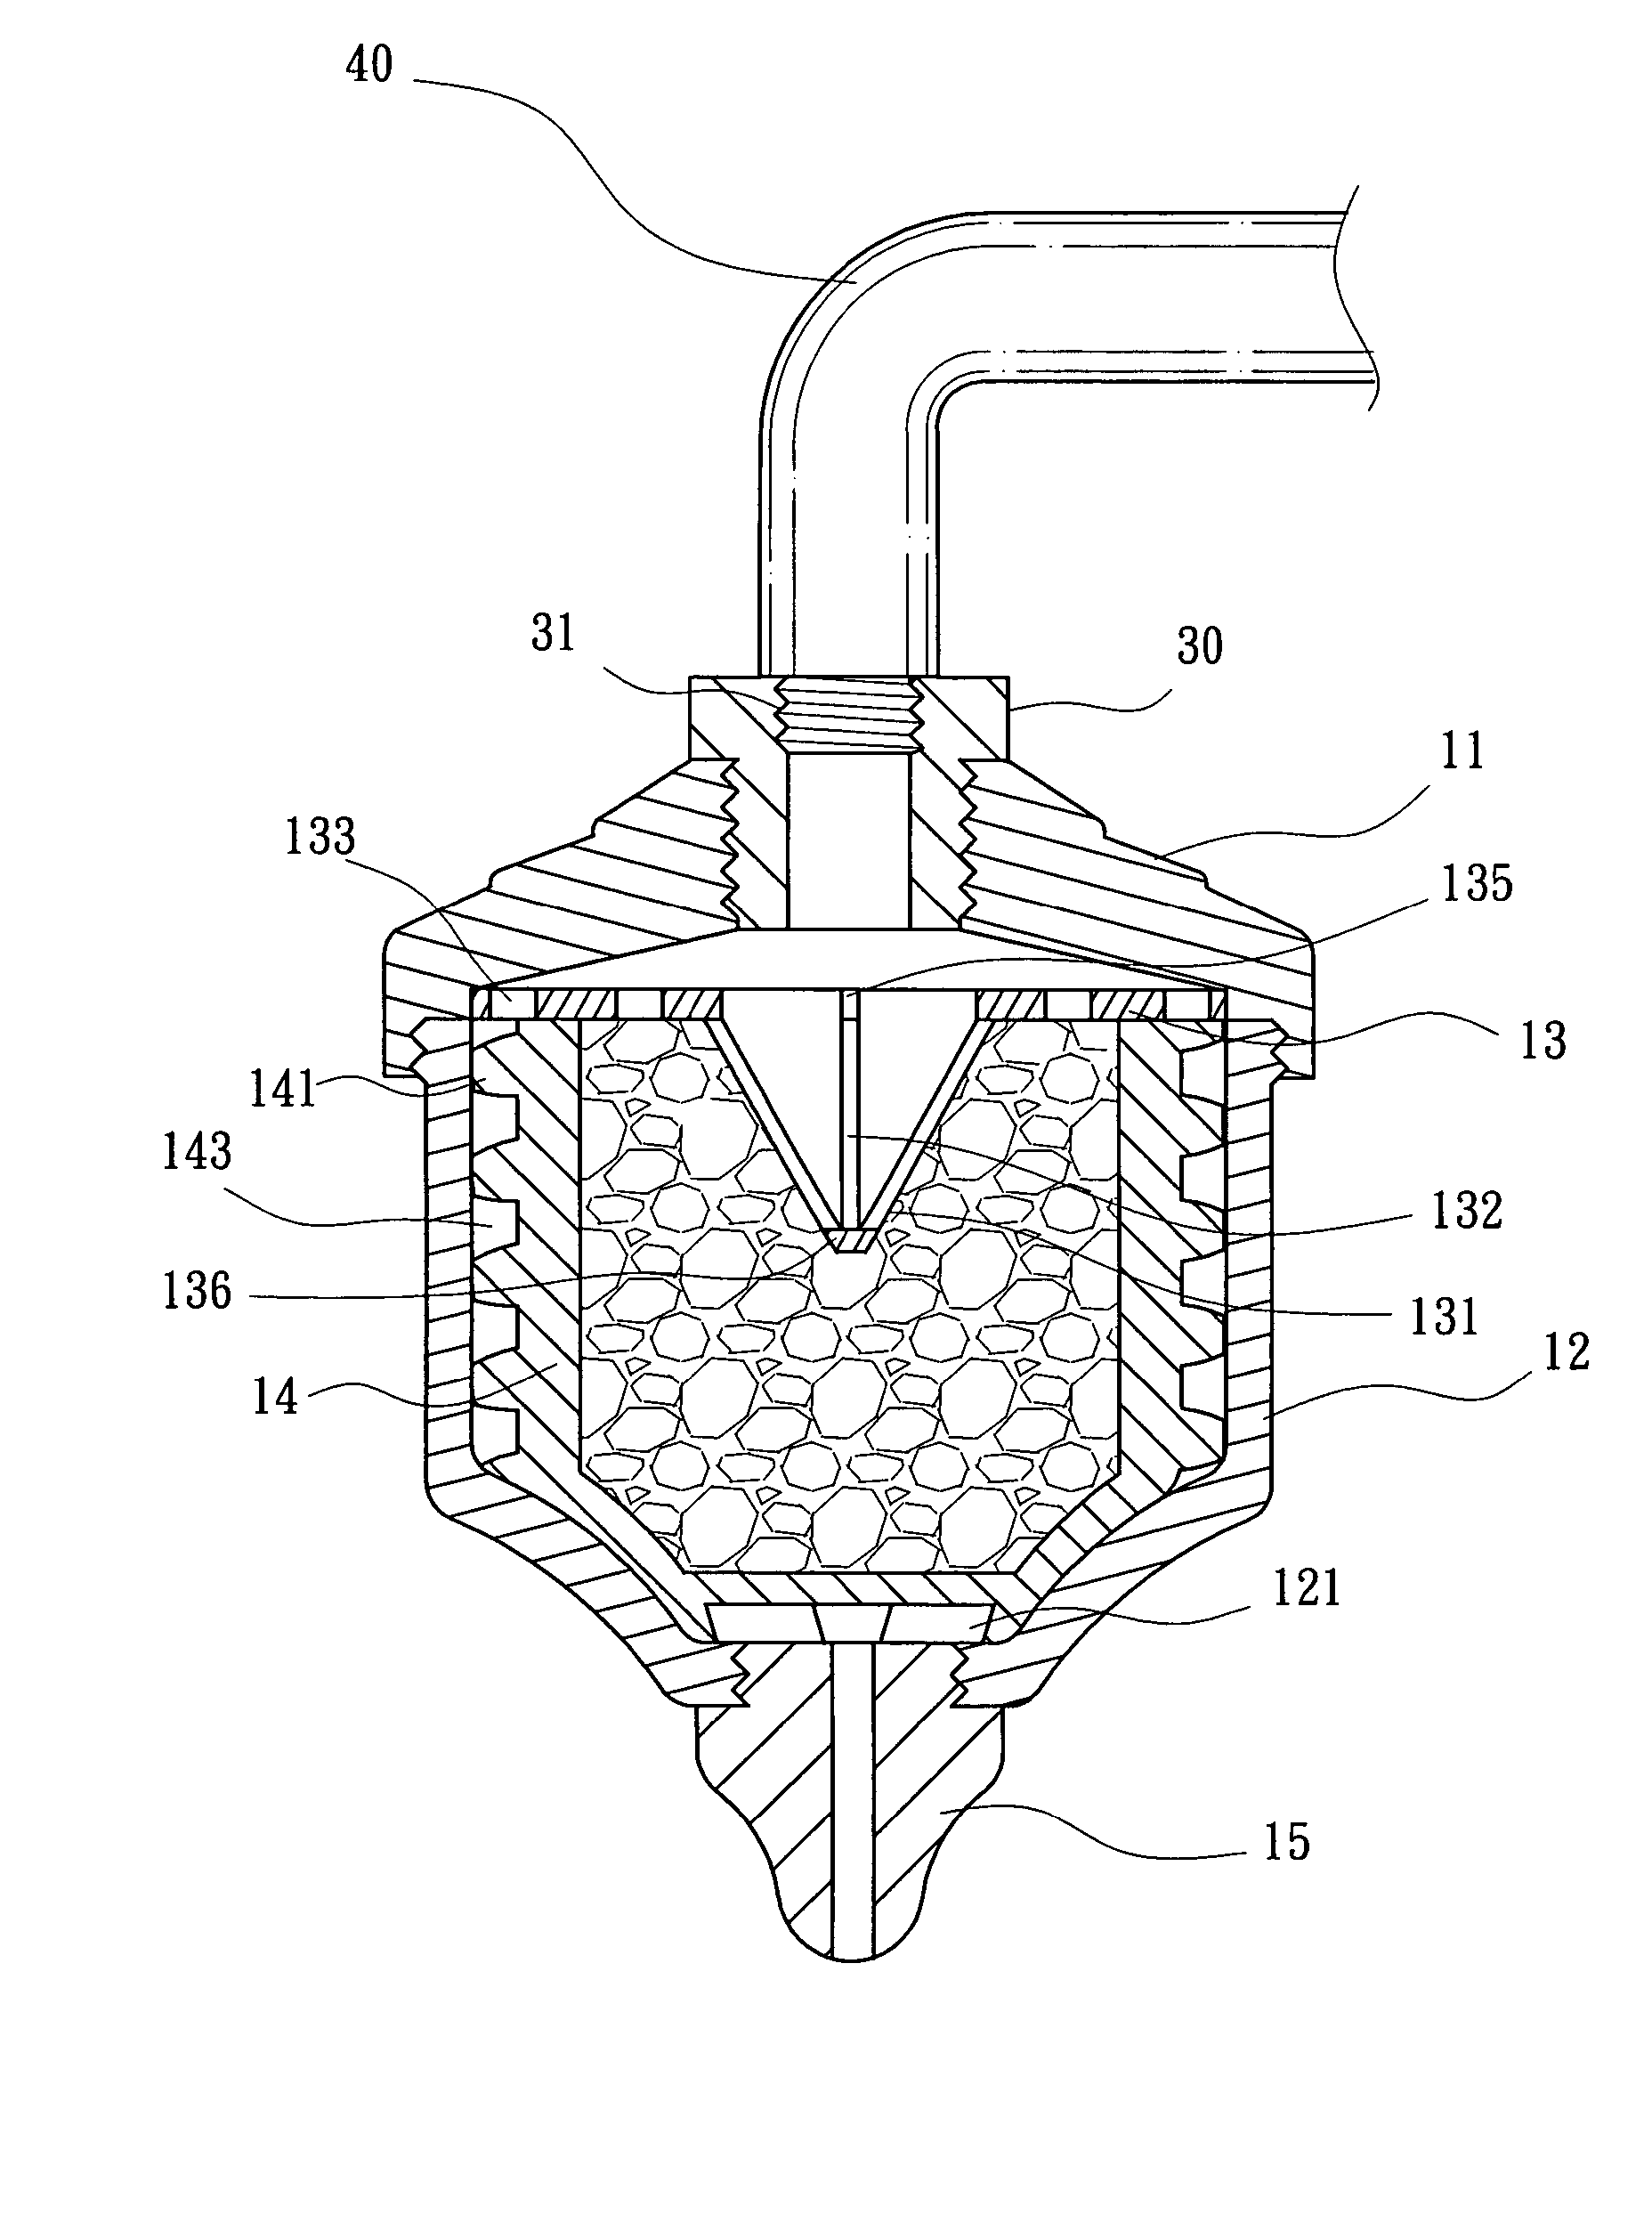 Simple faucet water-filtering device